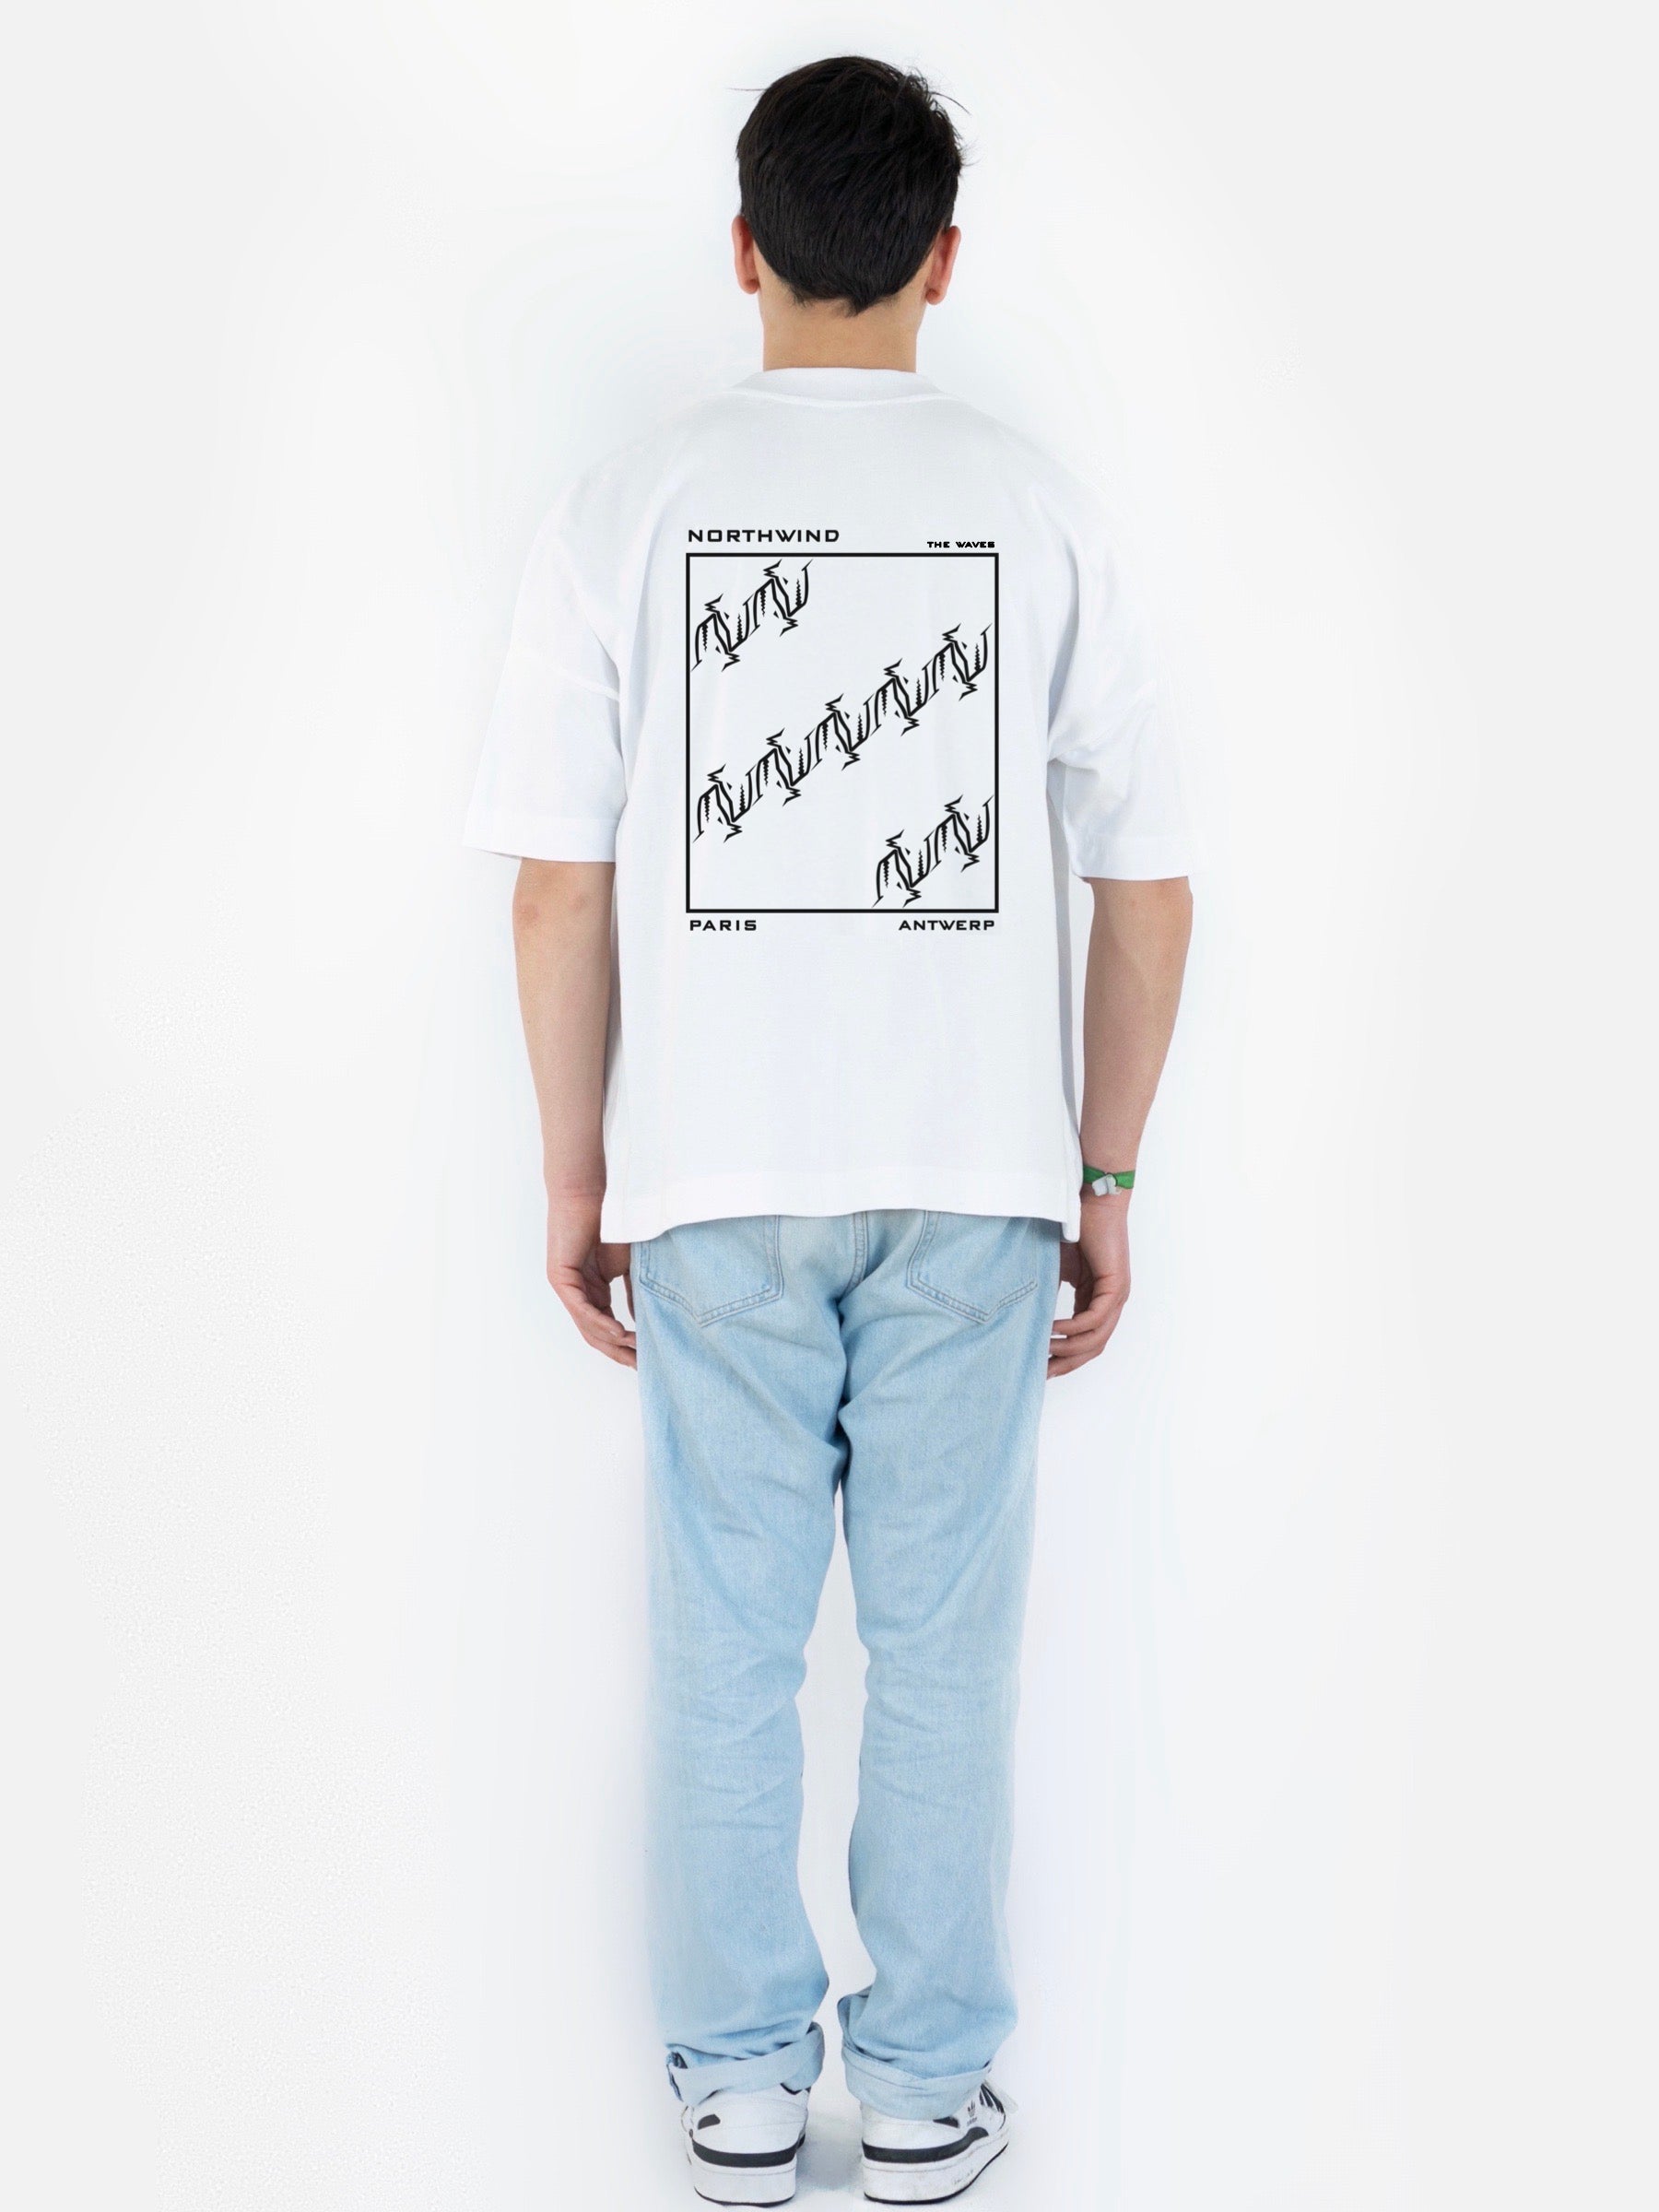 Lost Frequencies Organic T-Shirt - White